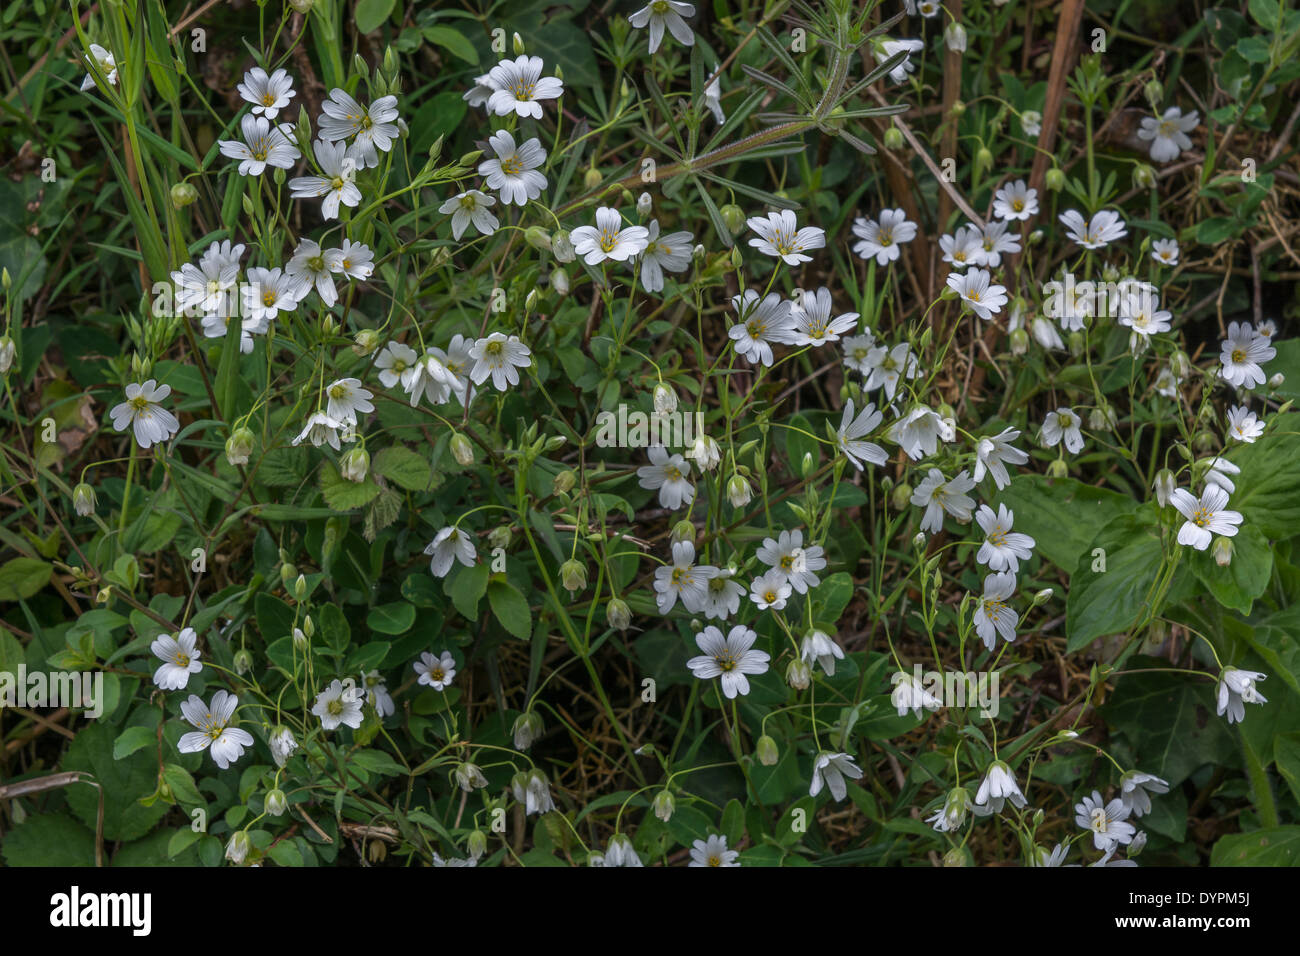 Greater Stitchwort / Stellaria holostea in flower (April). Former medicinal plant used in herbal remedies. Stock Photo